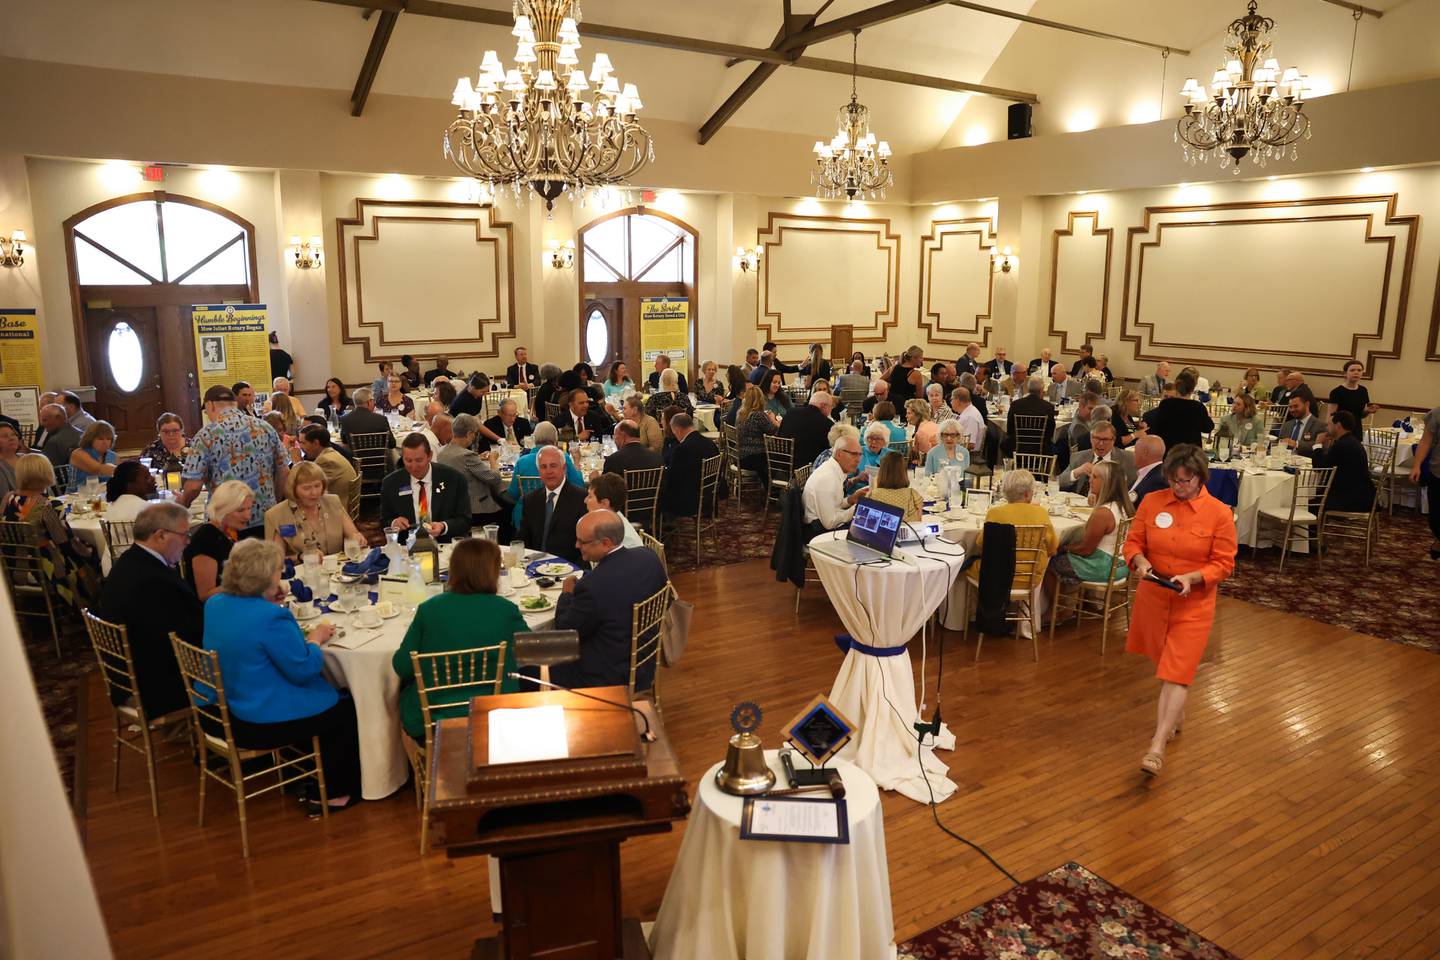 A news clipping from the Herald-News from 1949 sits on display at a luncheon to celebrate the 110th anniversary of the Rotary Club at Jacob Henry Mansion on Tuesday, Aug. 1 in Joliet.